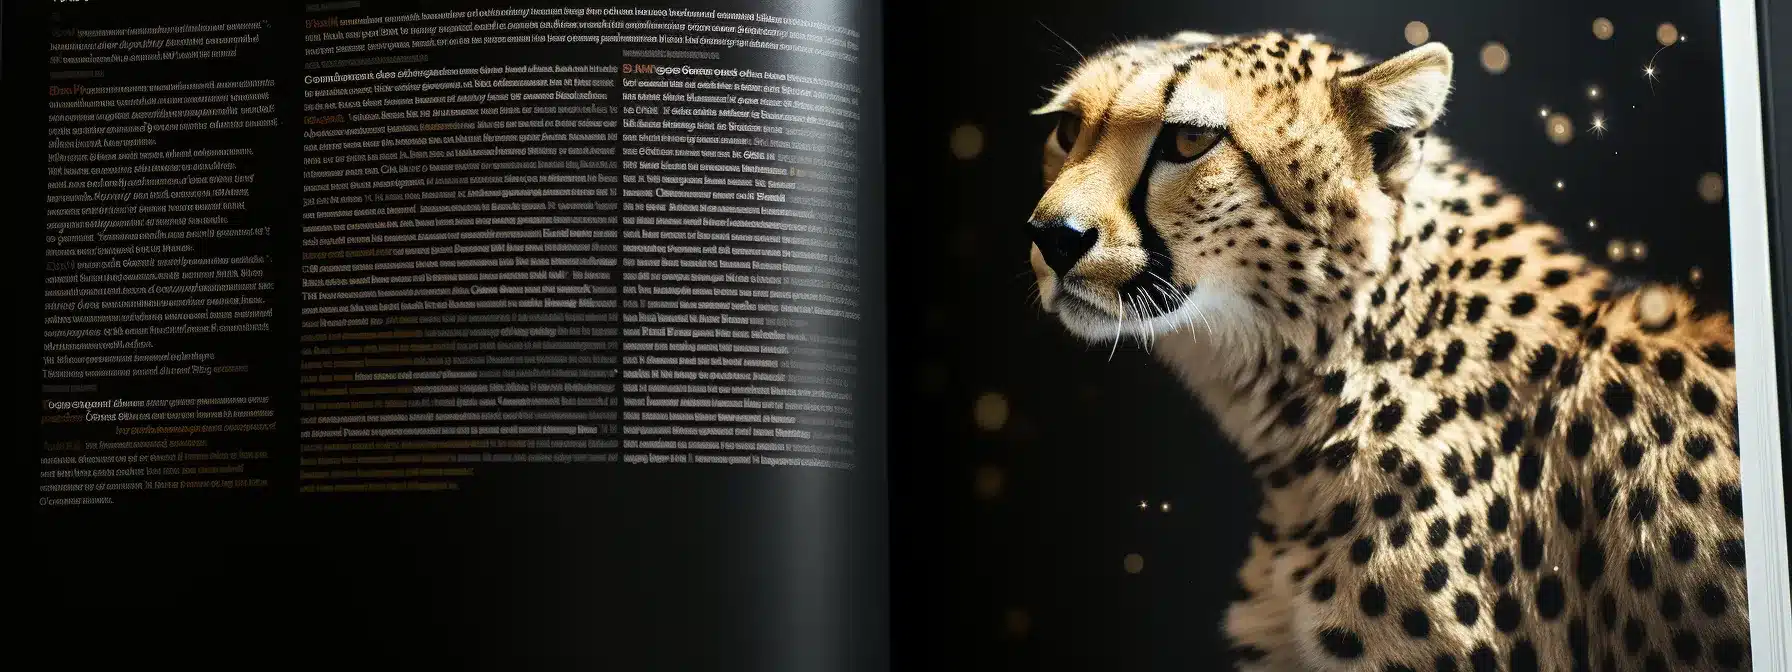 A Table Of Contents With A Sprinkle Of Creativity Turning Into A Wild Cheetah.